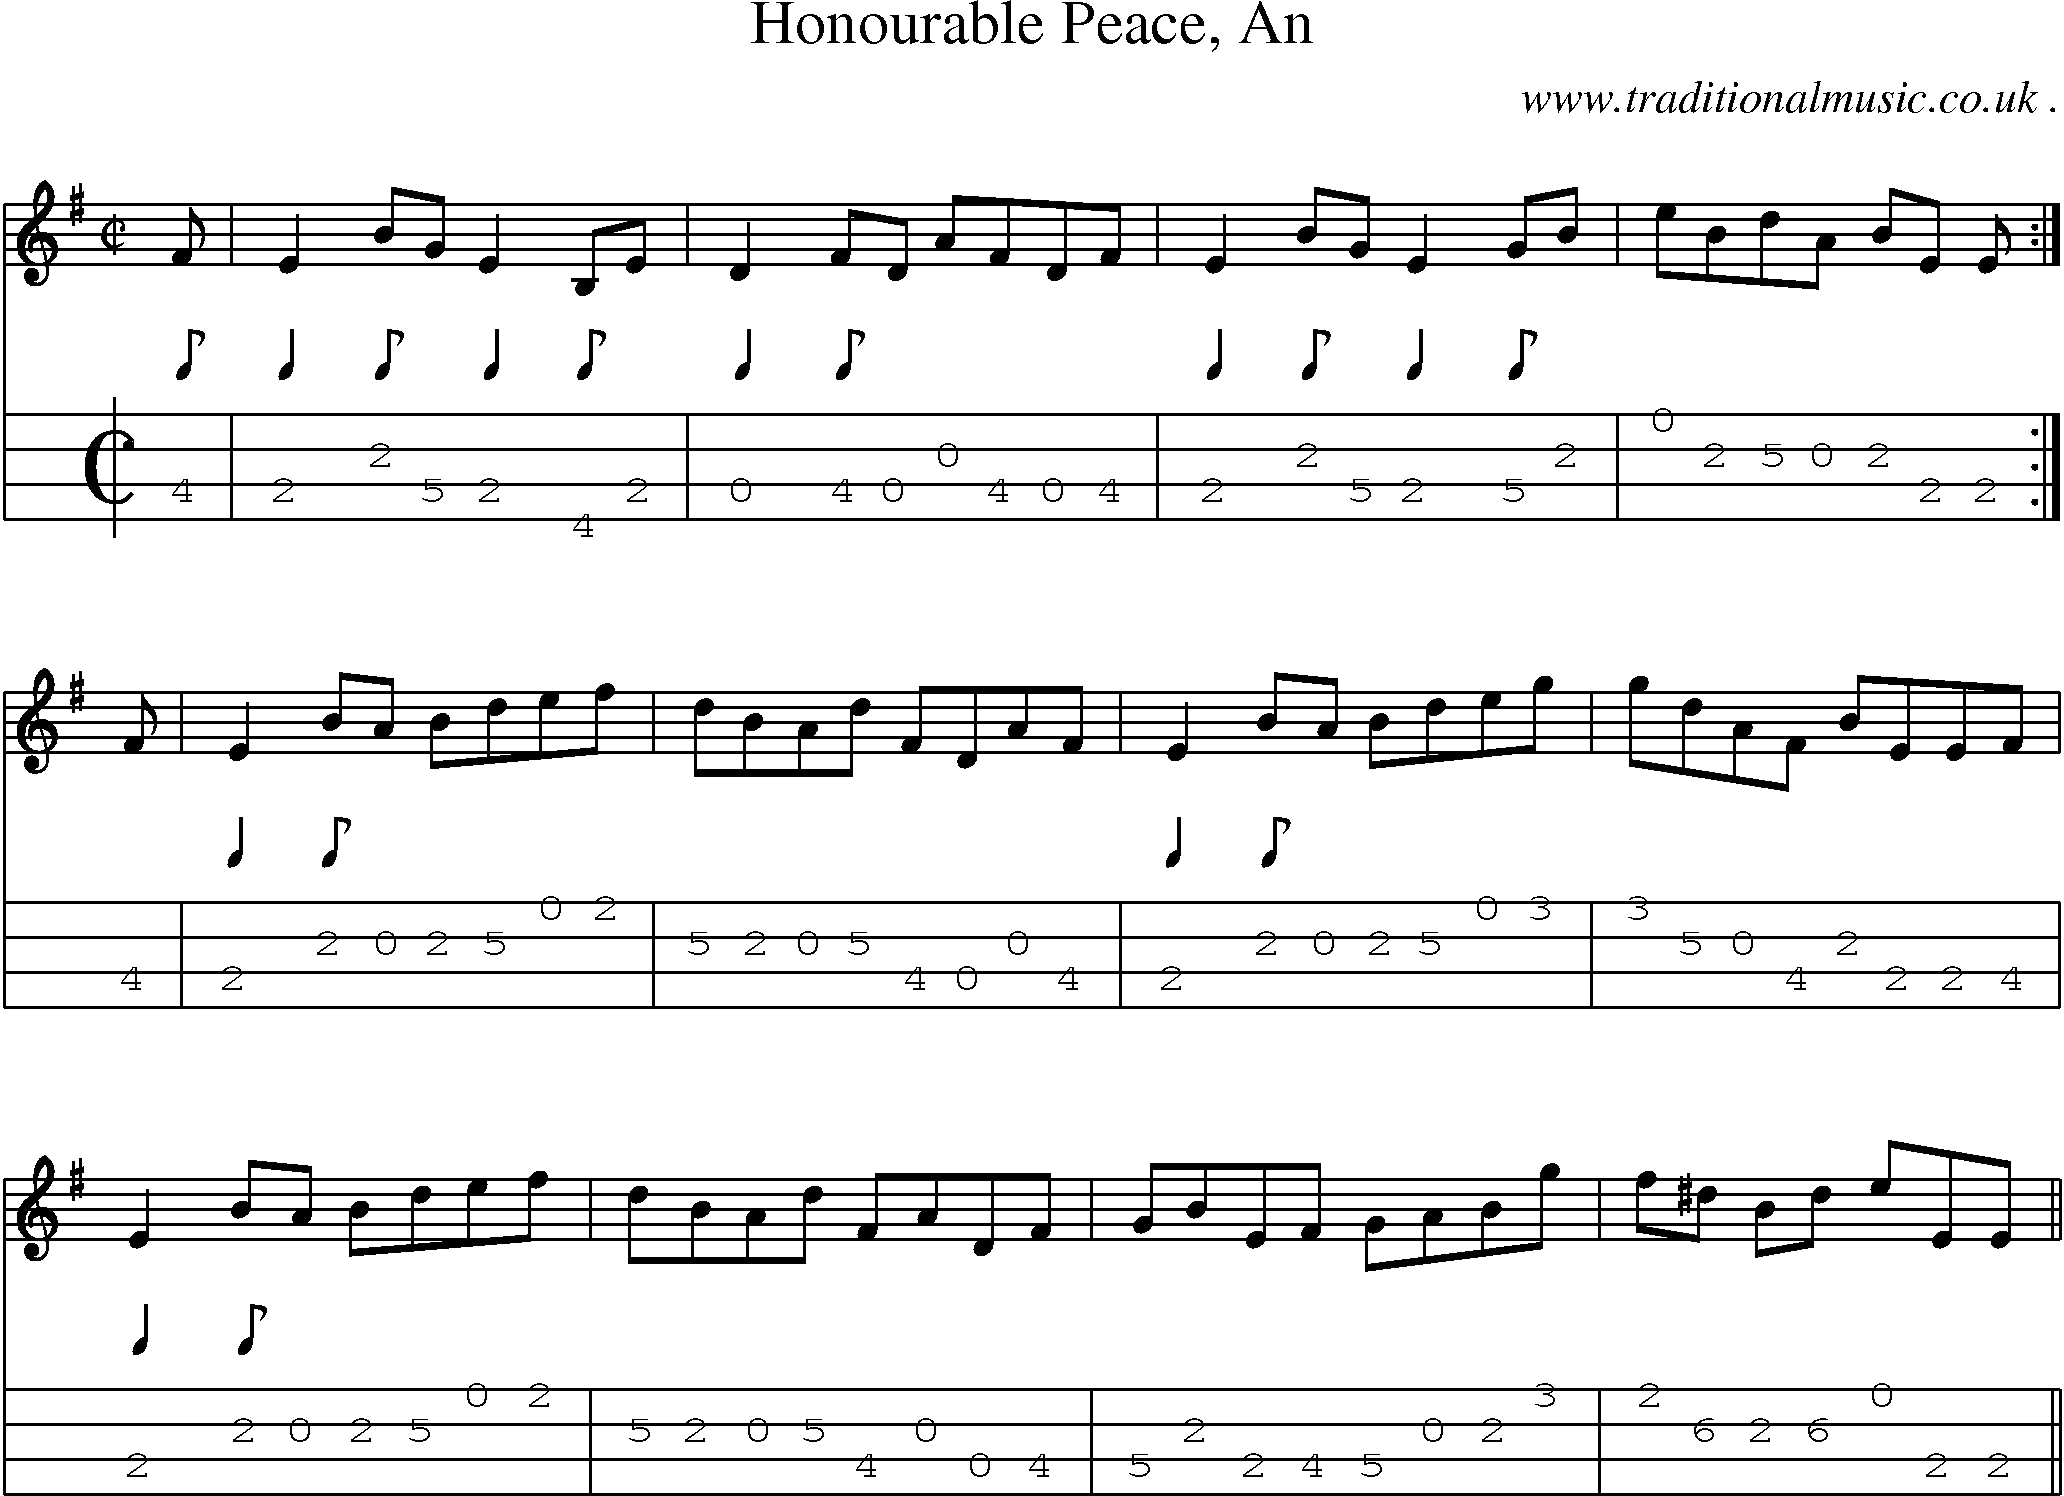 Sheet-music  score, Chords and Mandolin Tabs for Honourable Peace An